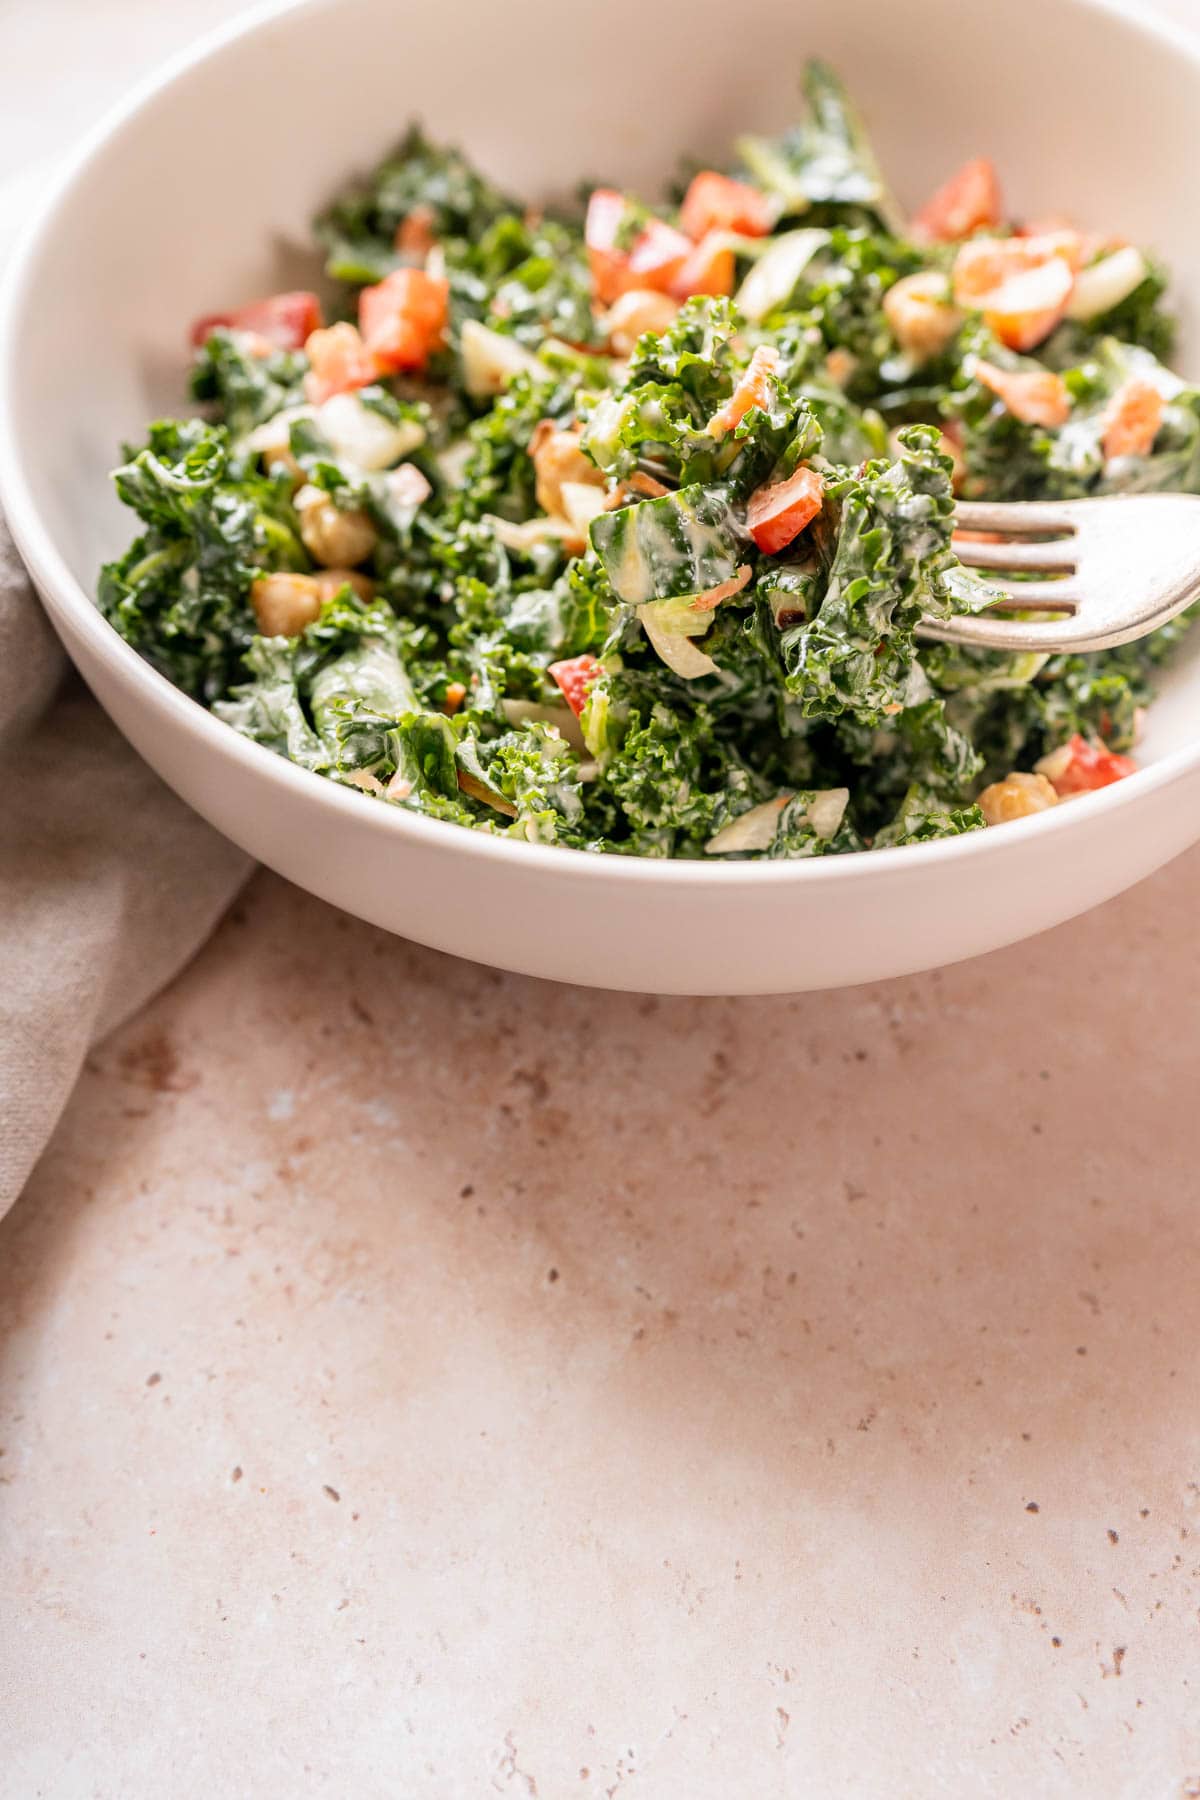 Close shot of a silver fork lifting kale salad out of a white ceramic bowl.